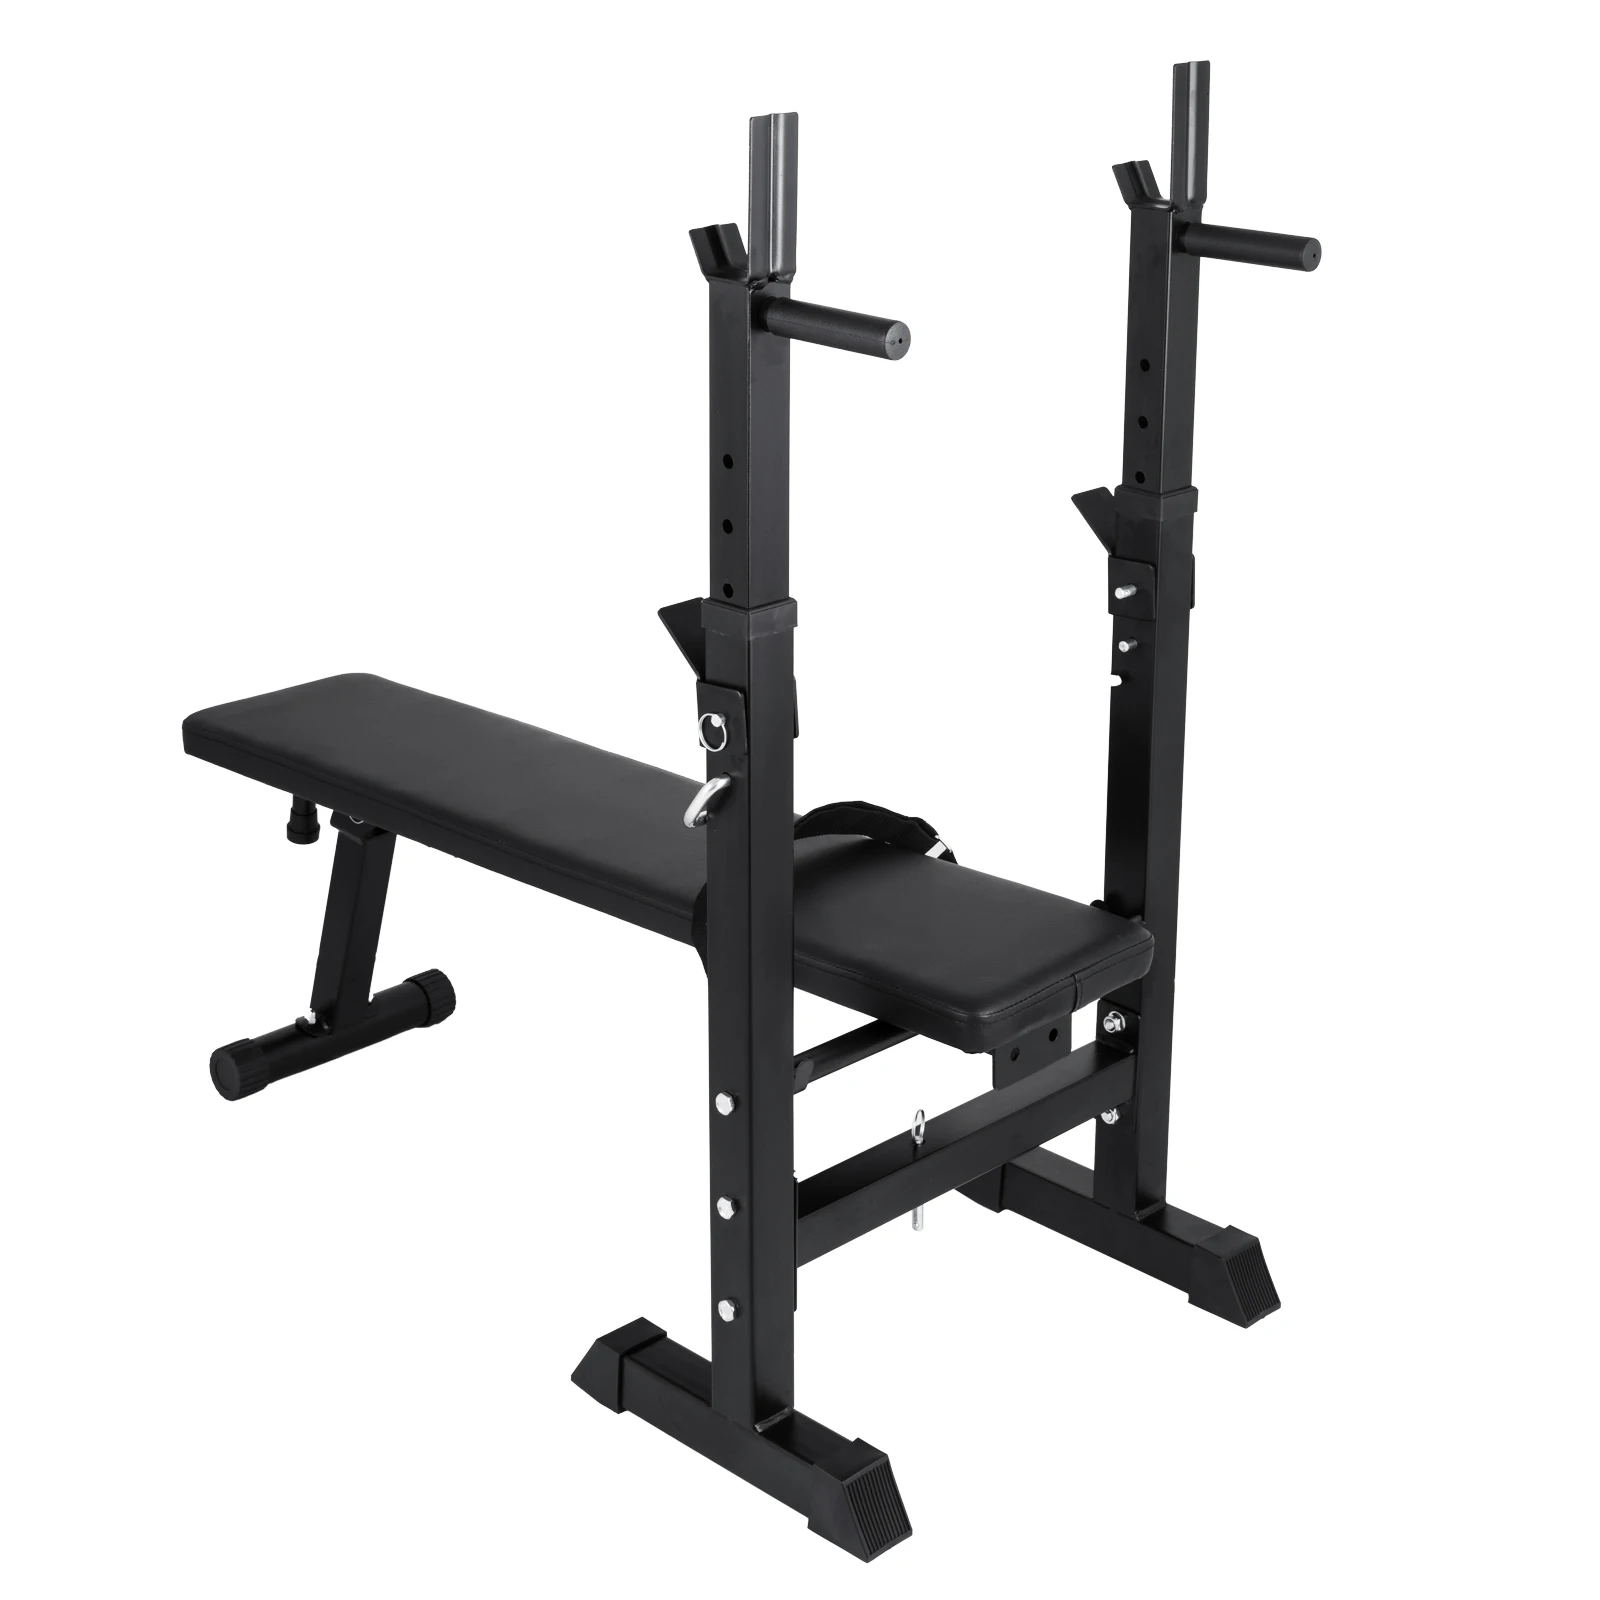 

Hot sale Bench Supports Your Back Adjustable Folding Weight Lifting Flat Weight Bench